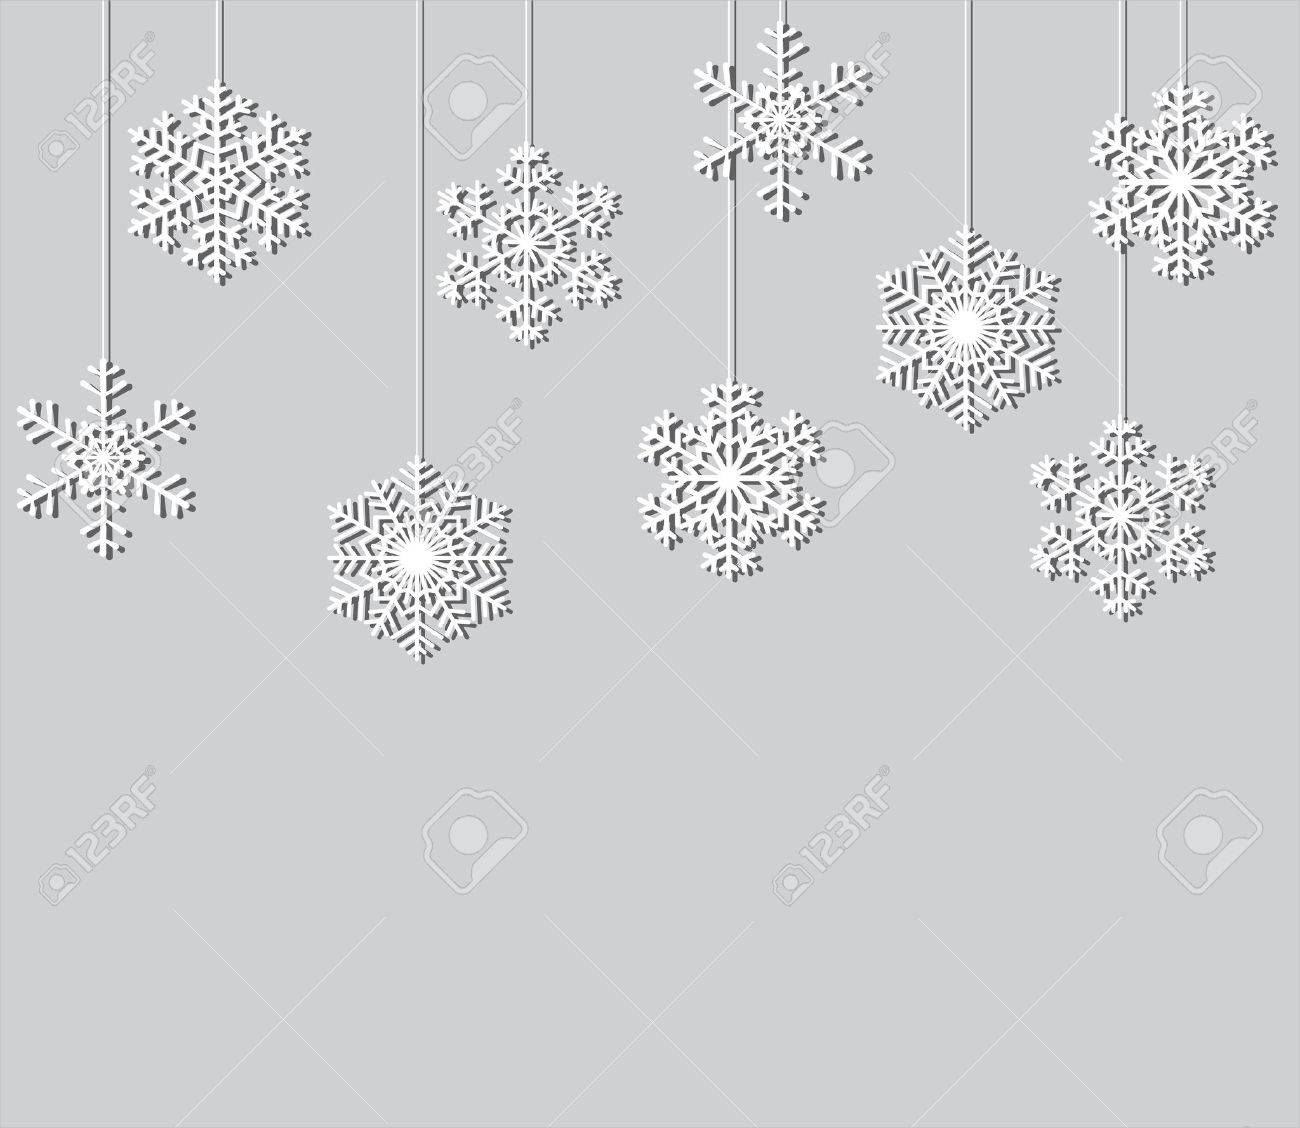 awesome paper snowflake